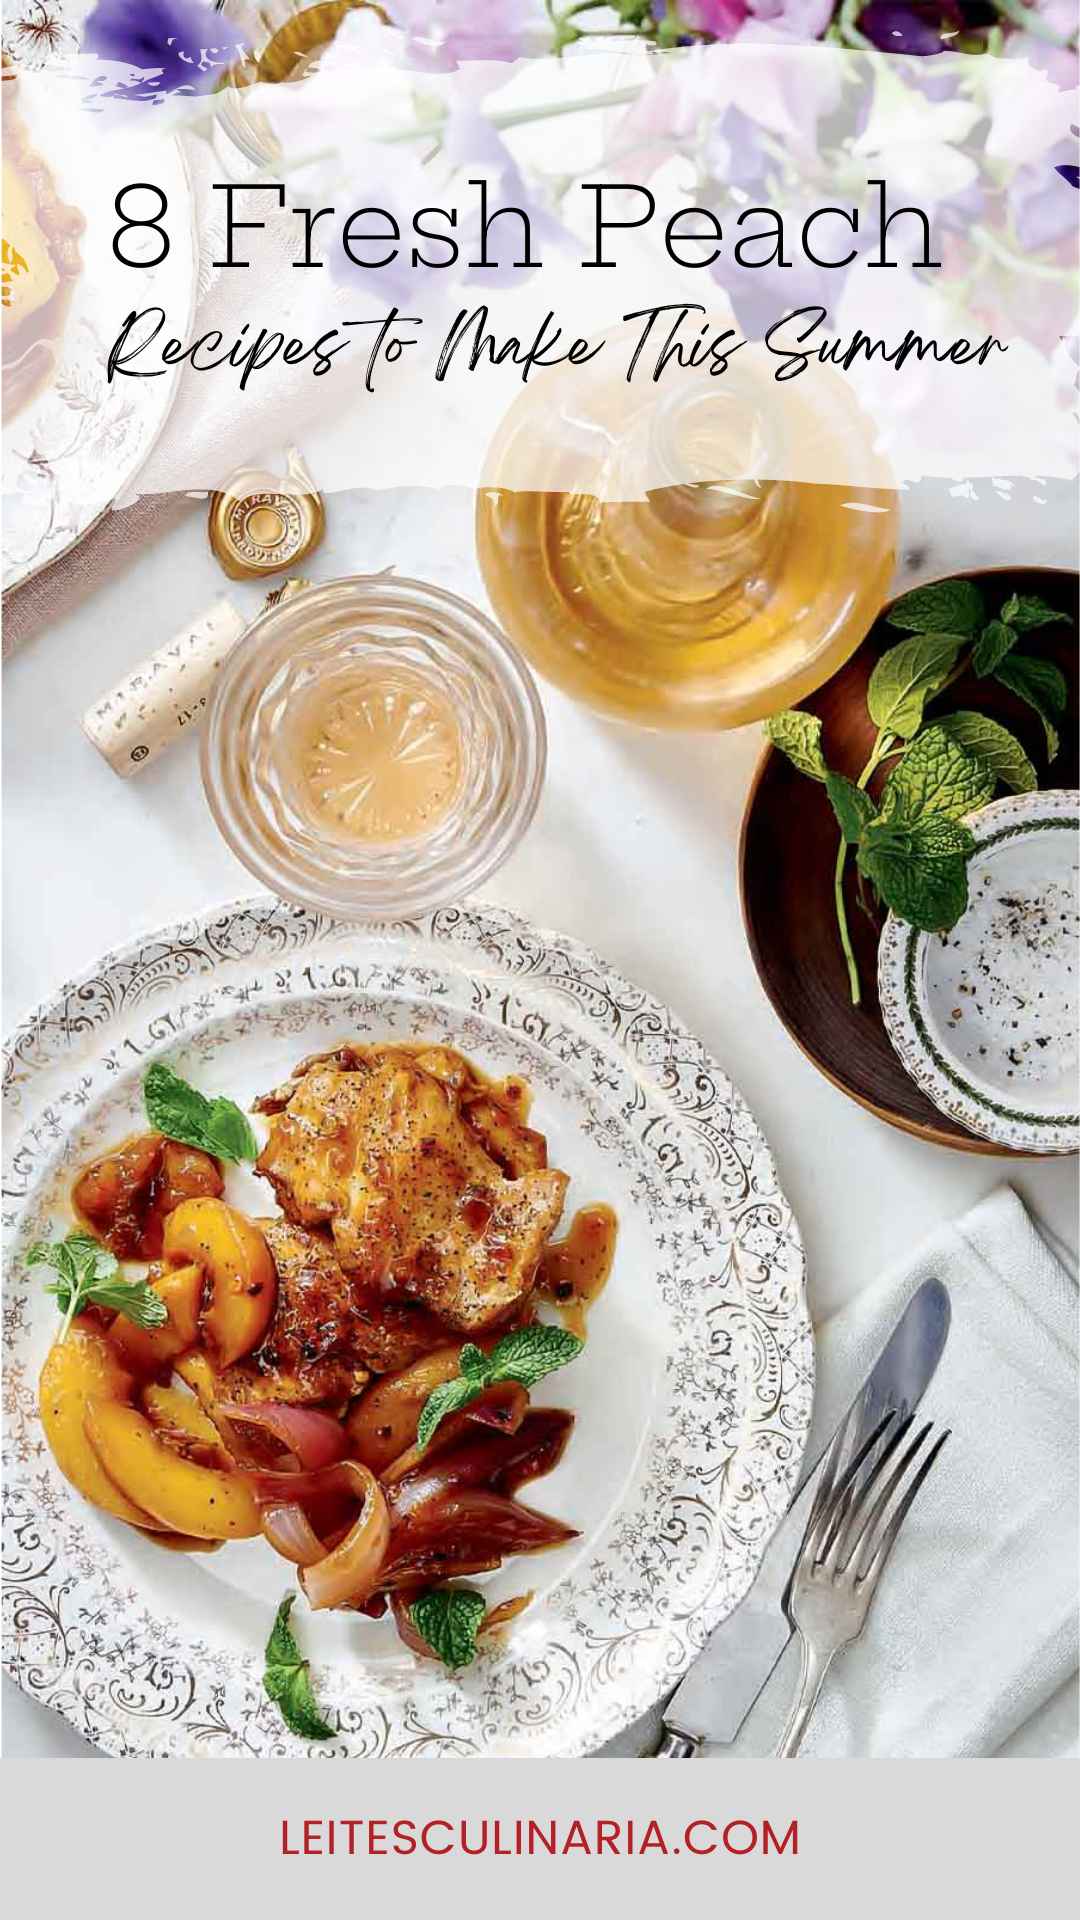 Chicken thighs and peaches on a plate with white wine, mint sprigs, and salt and pepper nearby.